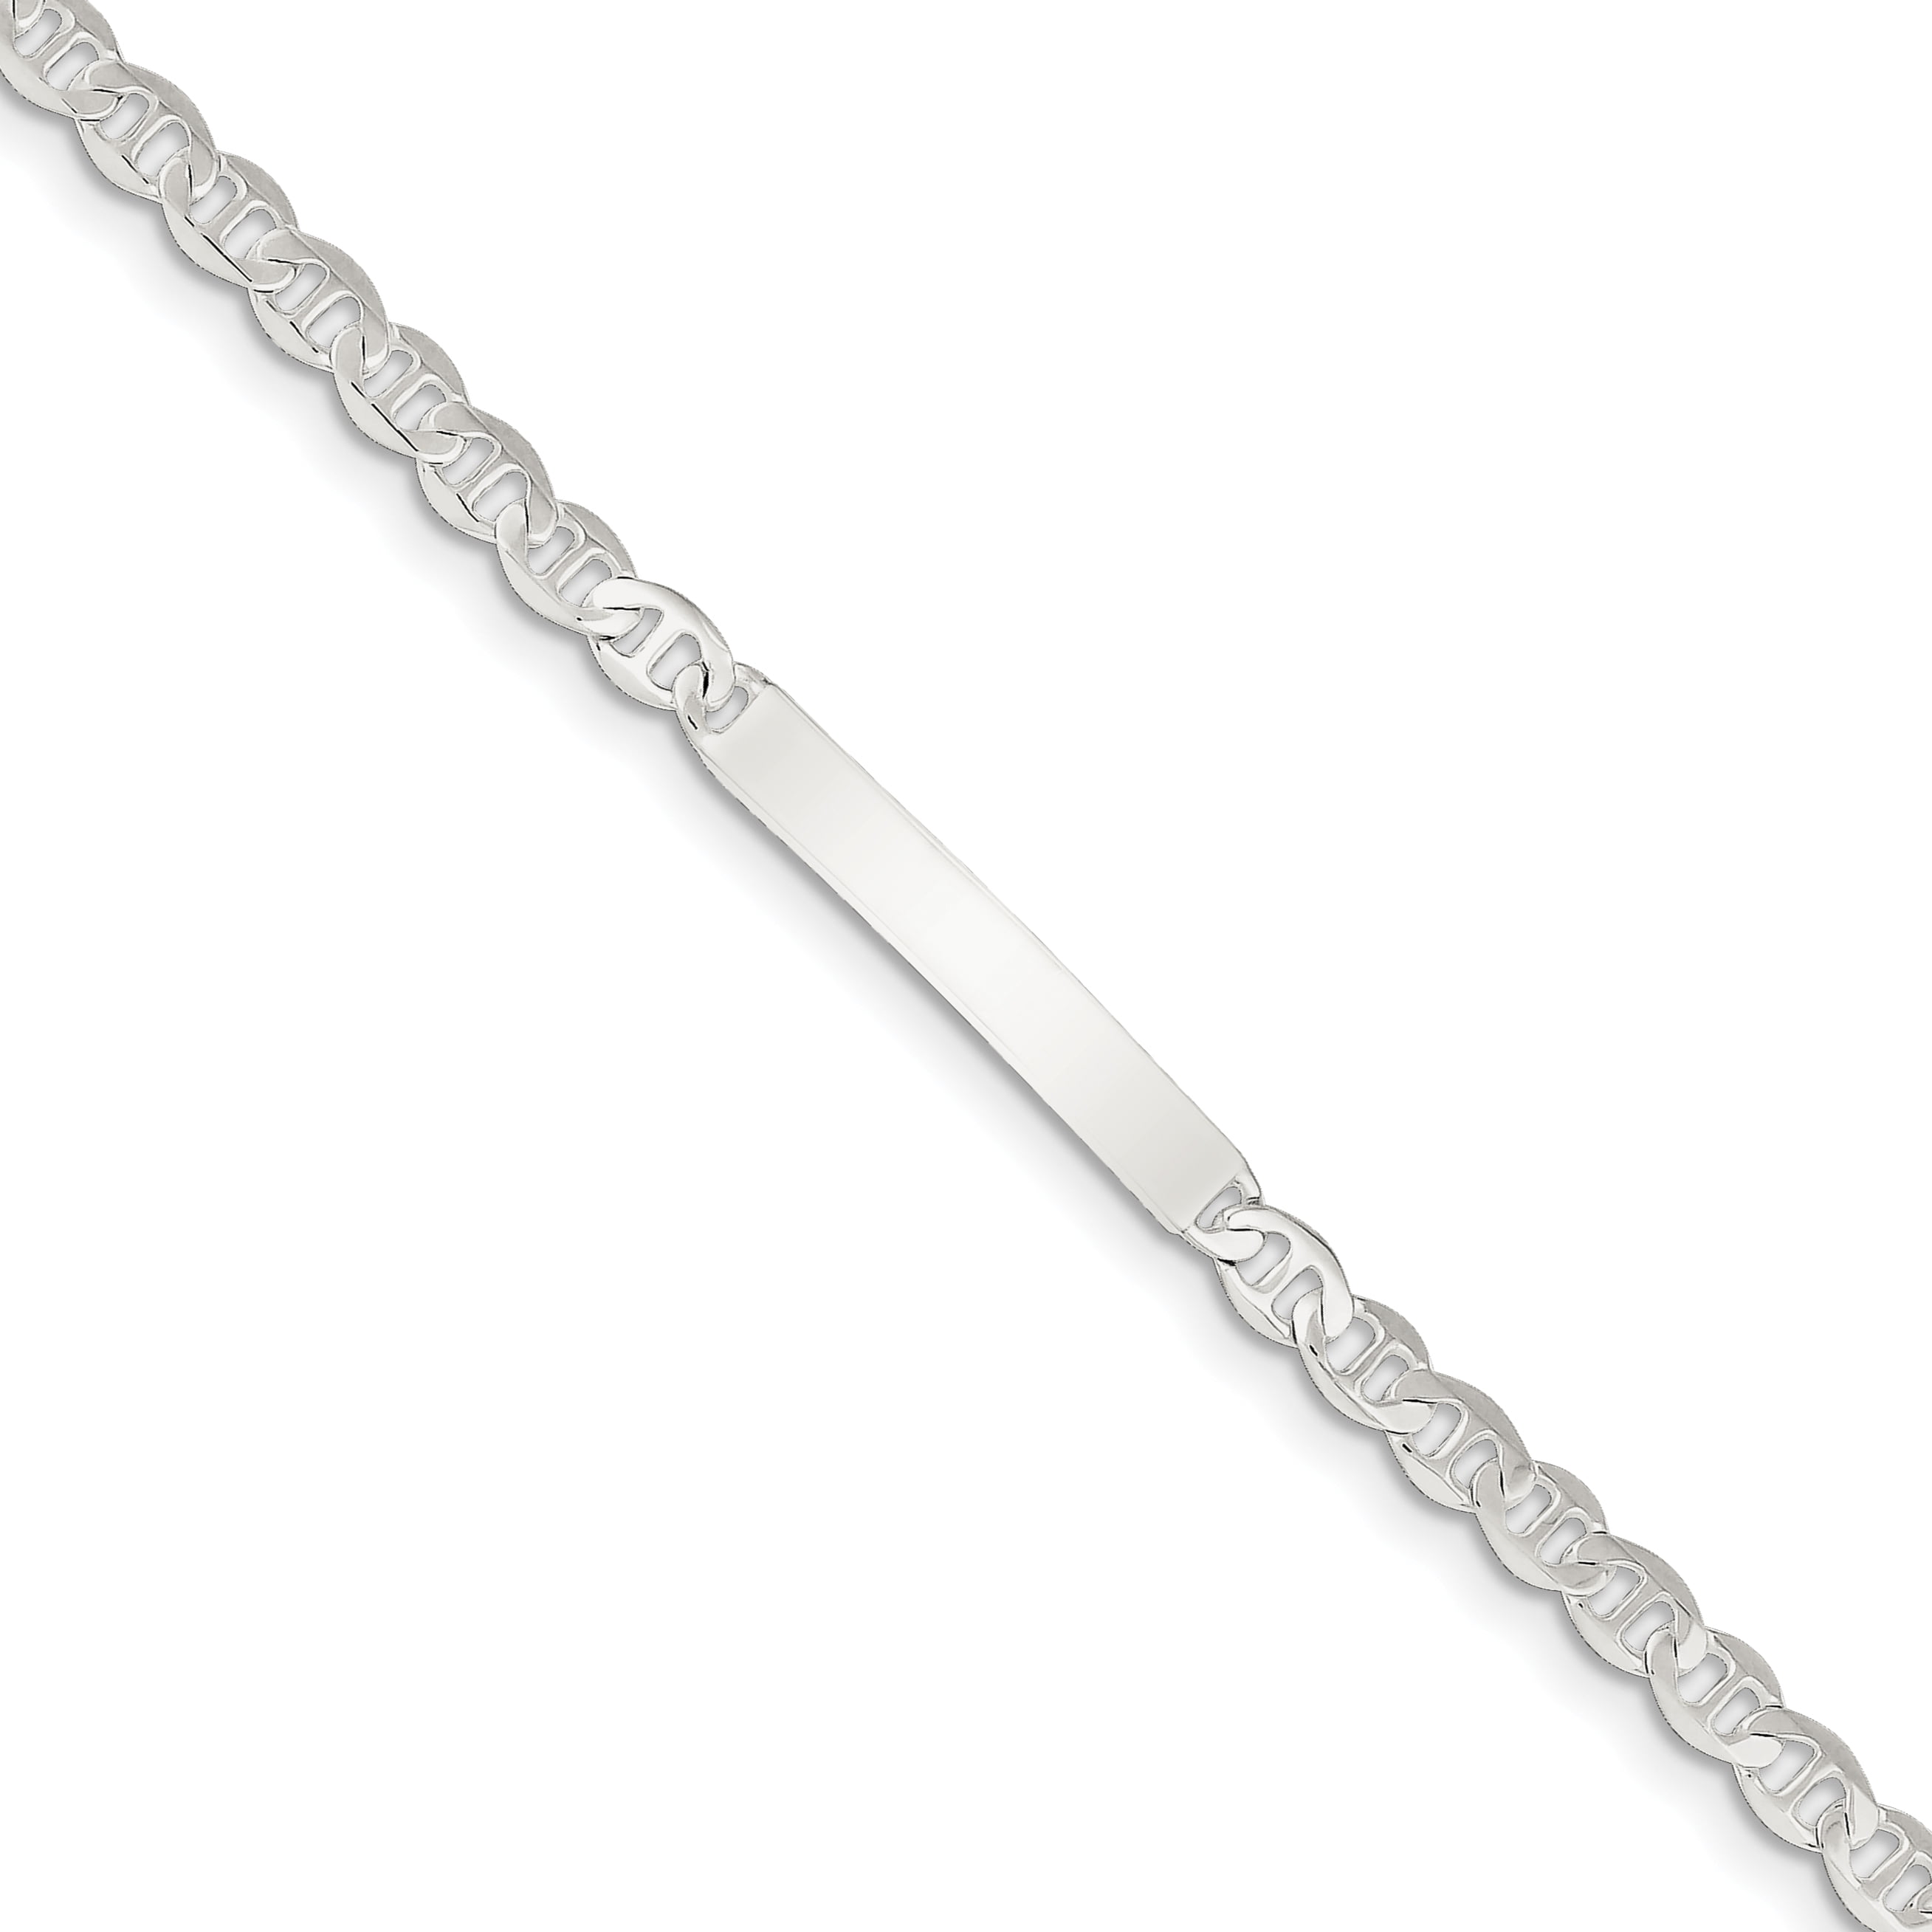 Jewels By Lux Sterling Silver Polished Medical Curb Link ID Bracelet